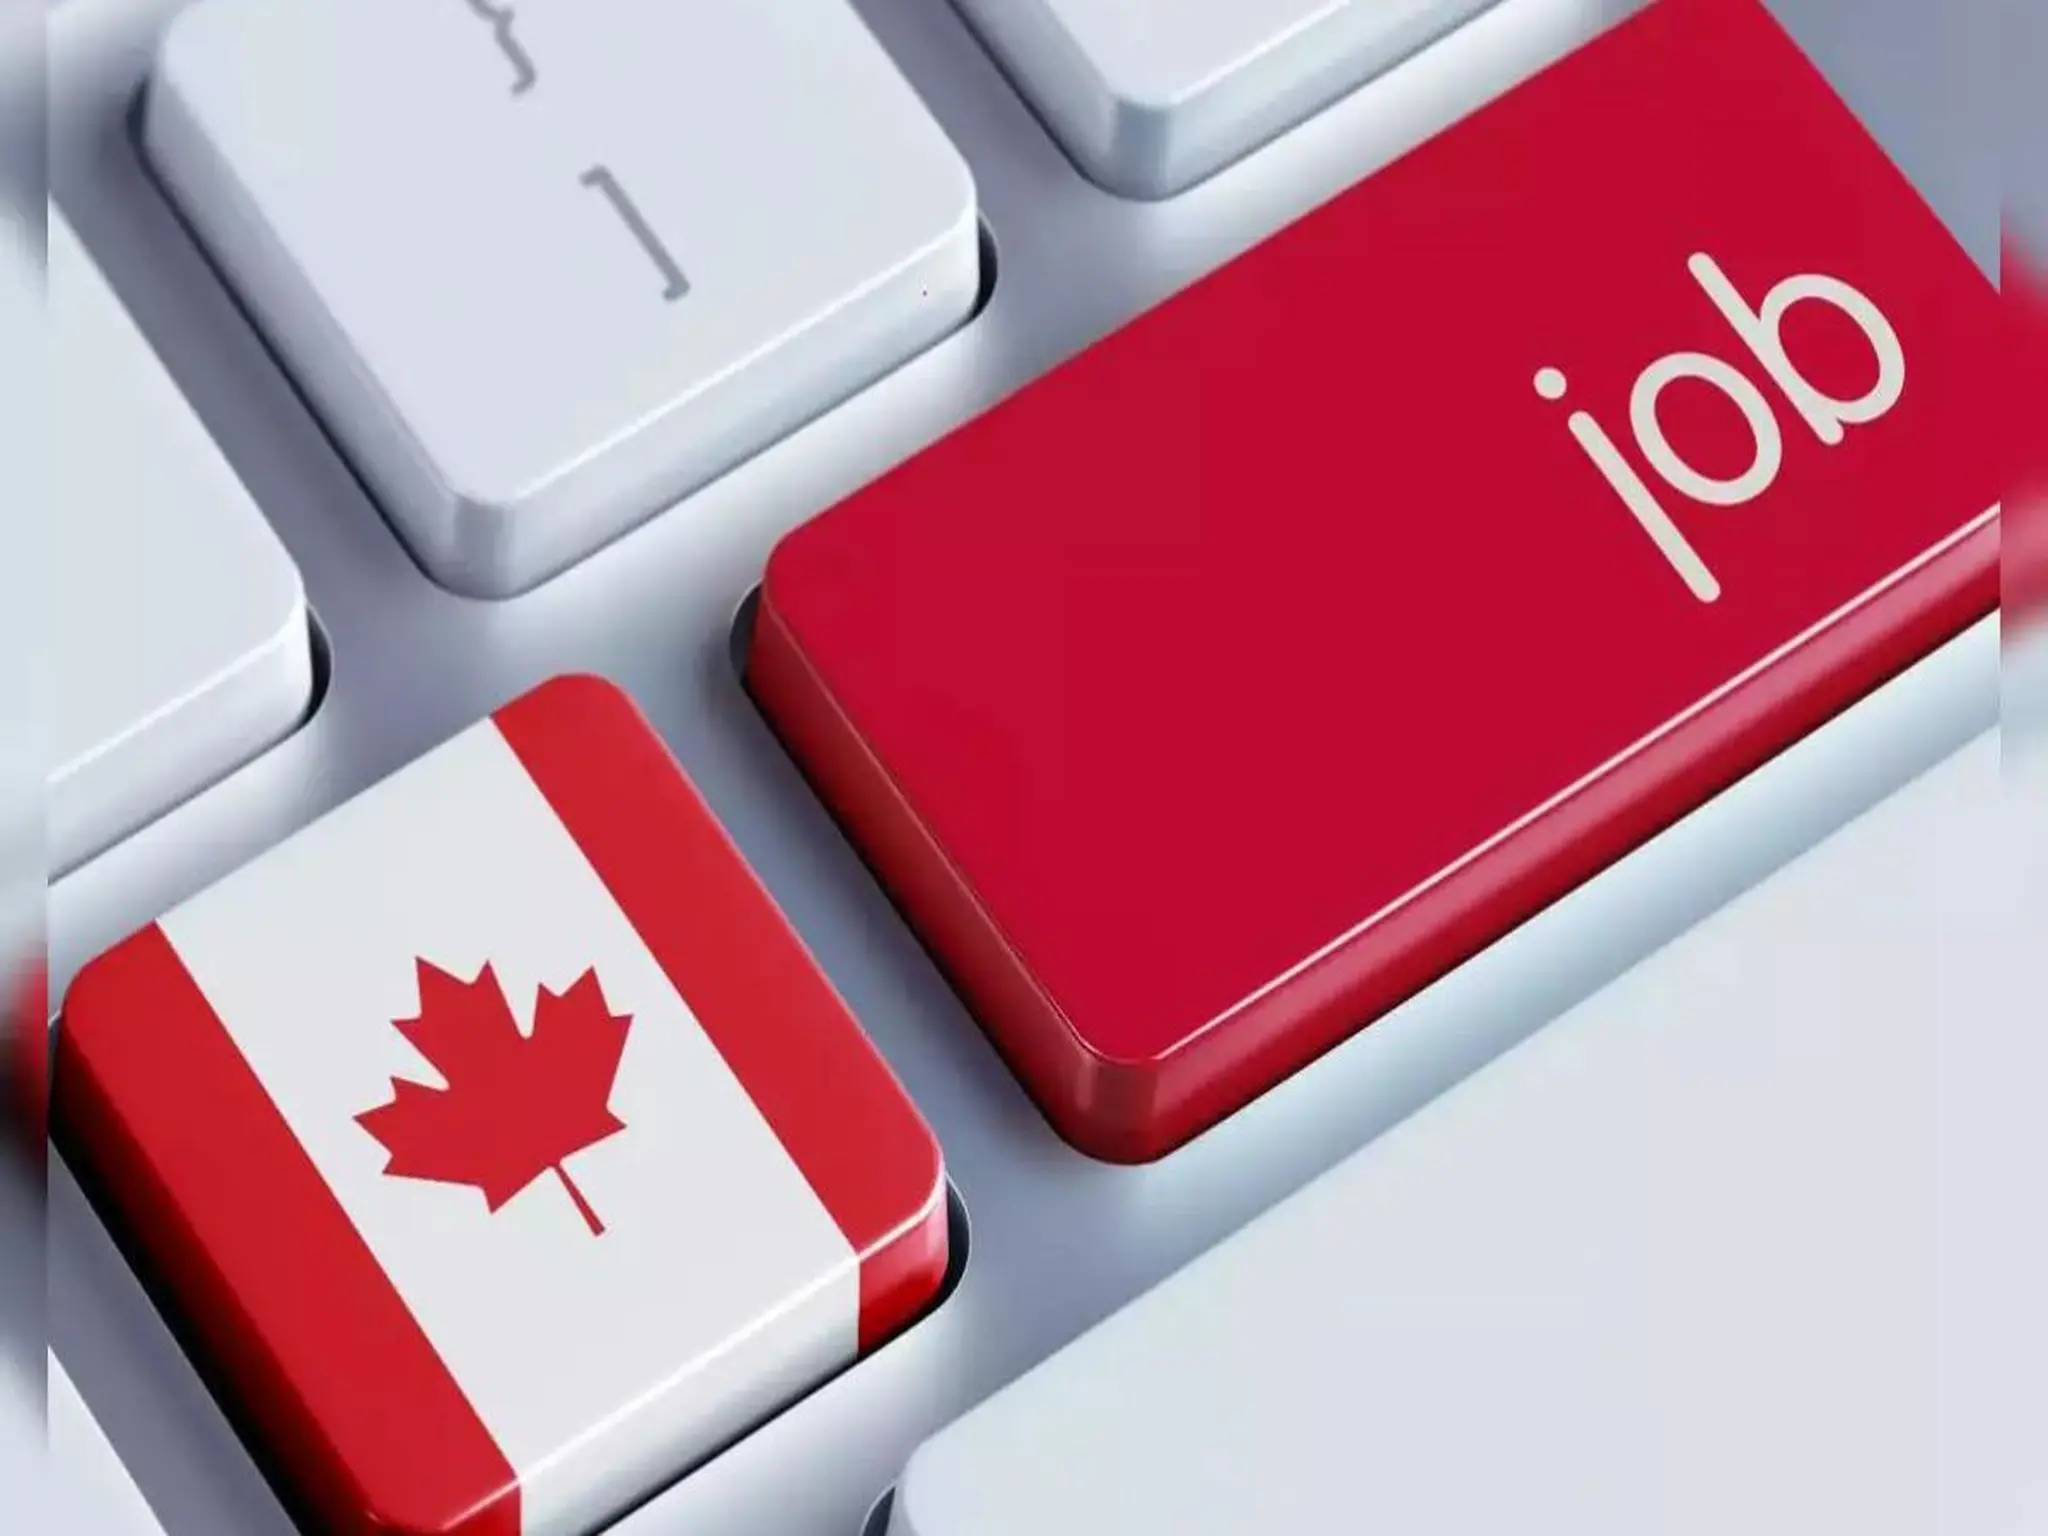 LMIA sets out requirements for the employment of foreigners in Canada and a list of accessible occupations